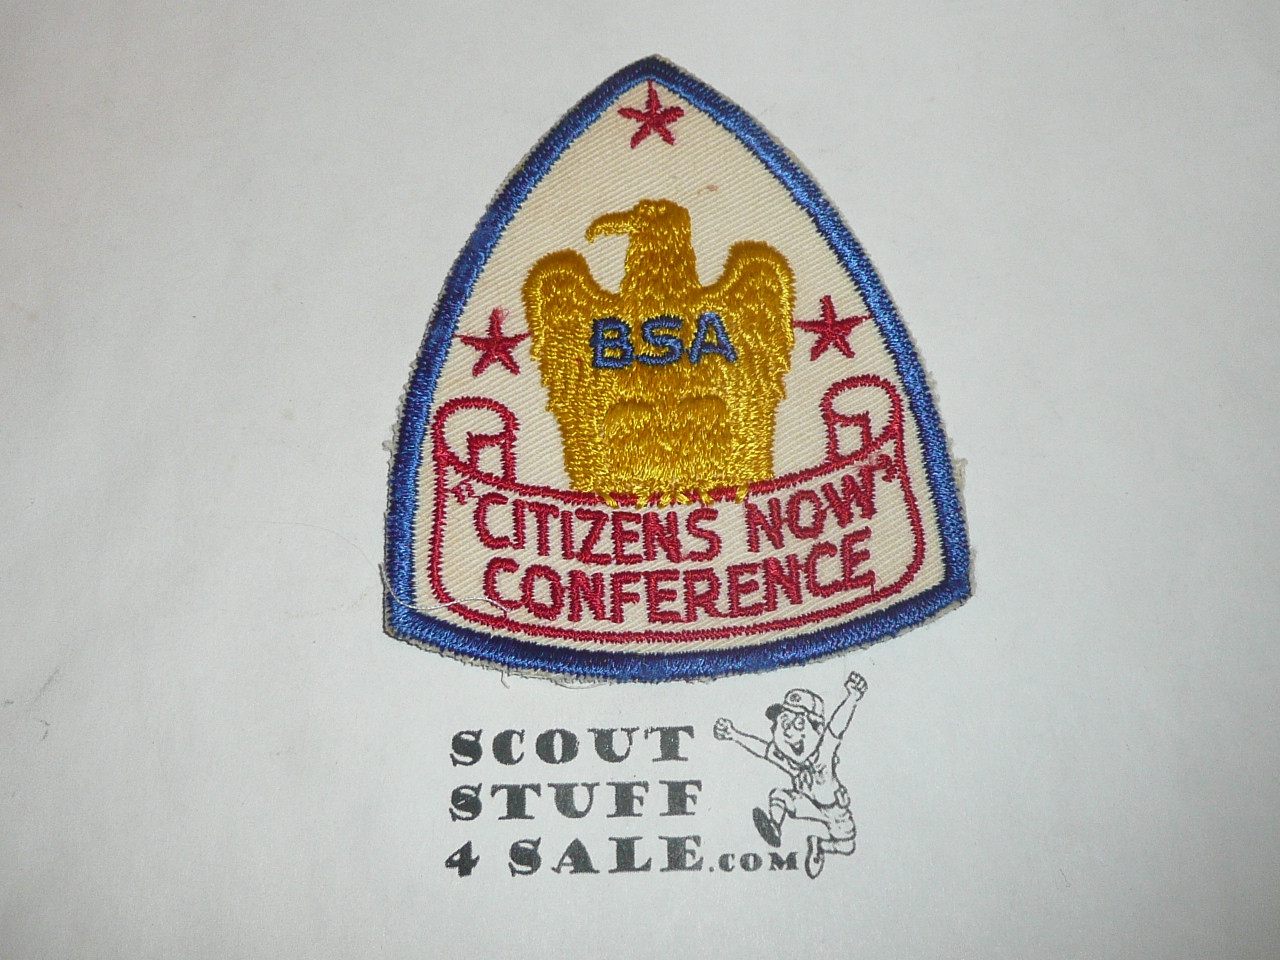 Citizens Now Conference Patch, Generic BSA issue, white twill, blue c/e